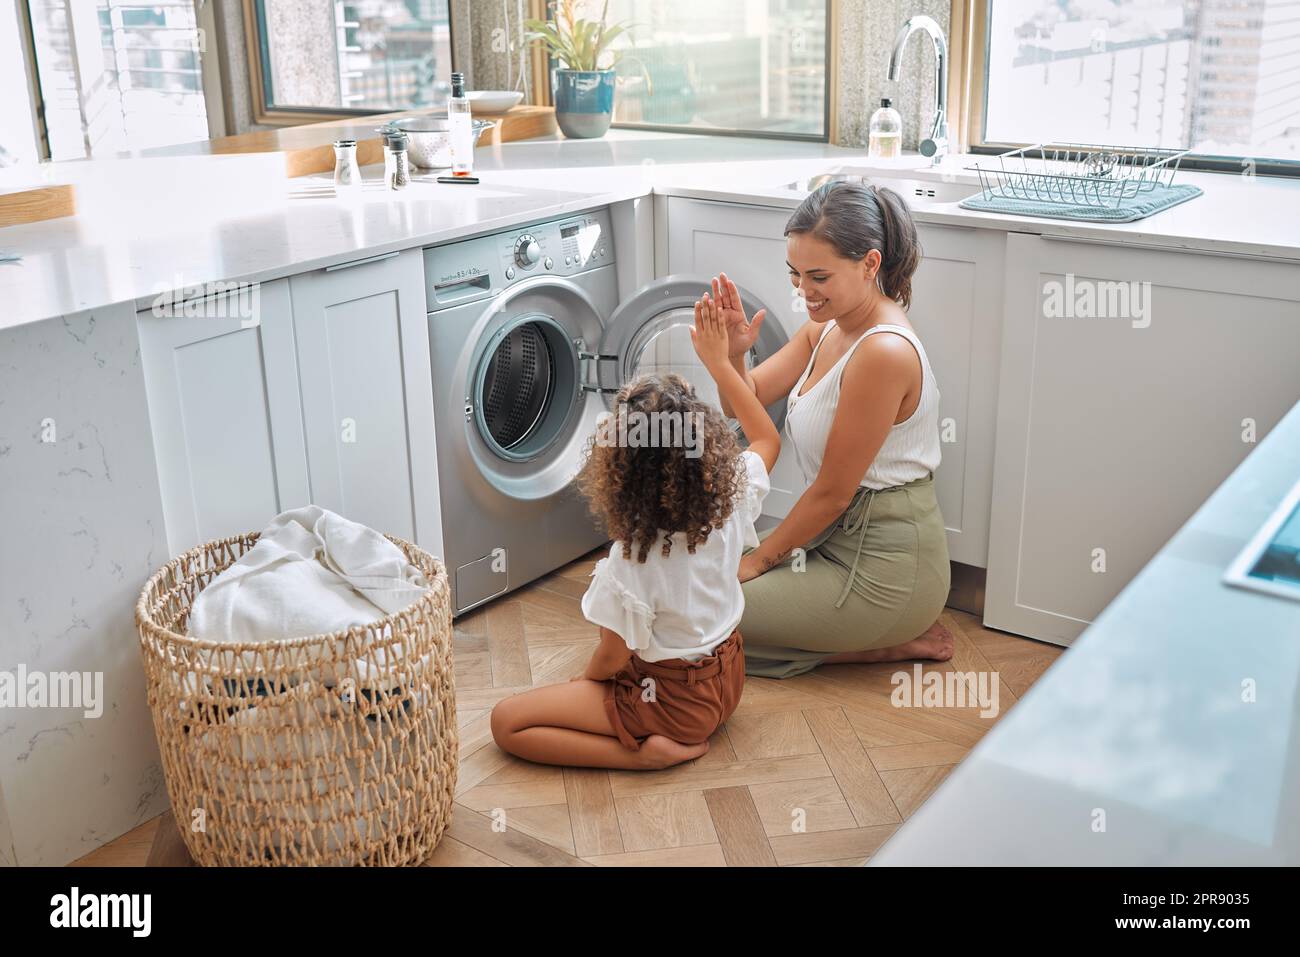 Young hispanic mother and her daughter giving each other a high five after doing laundry at home. Adorable little girl helping her mother with household chores Stock Photo